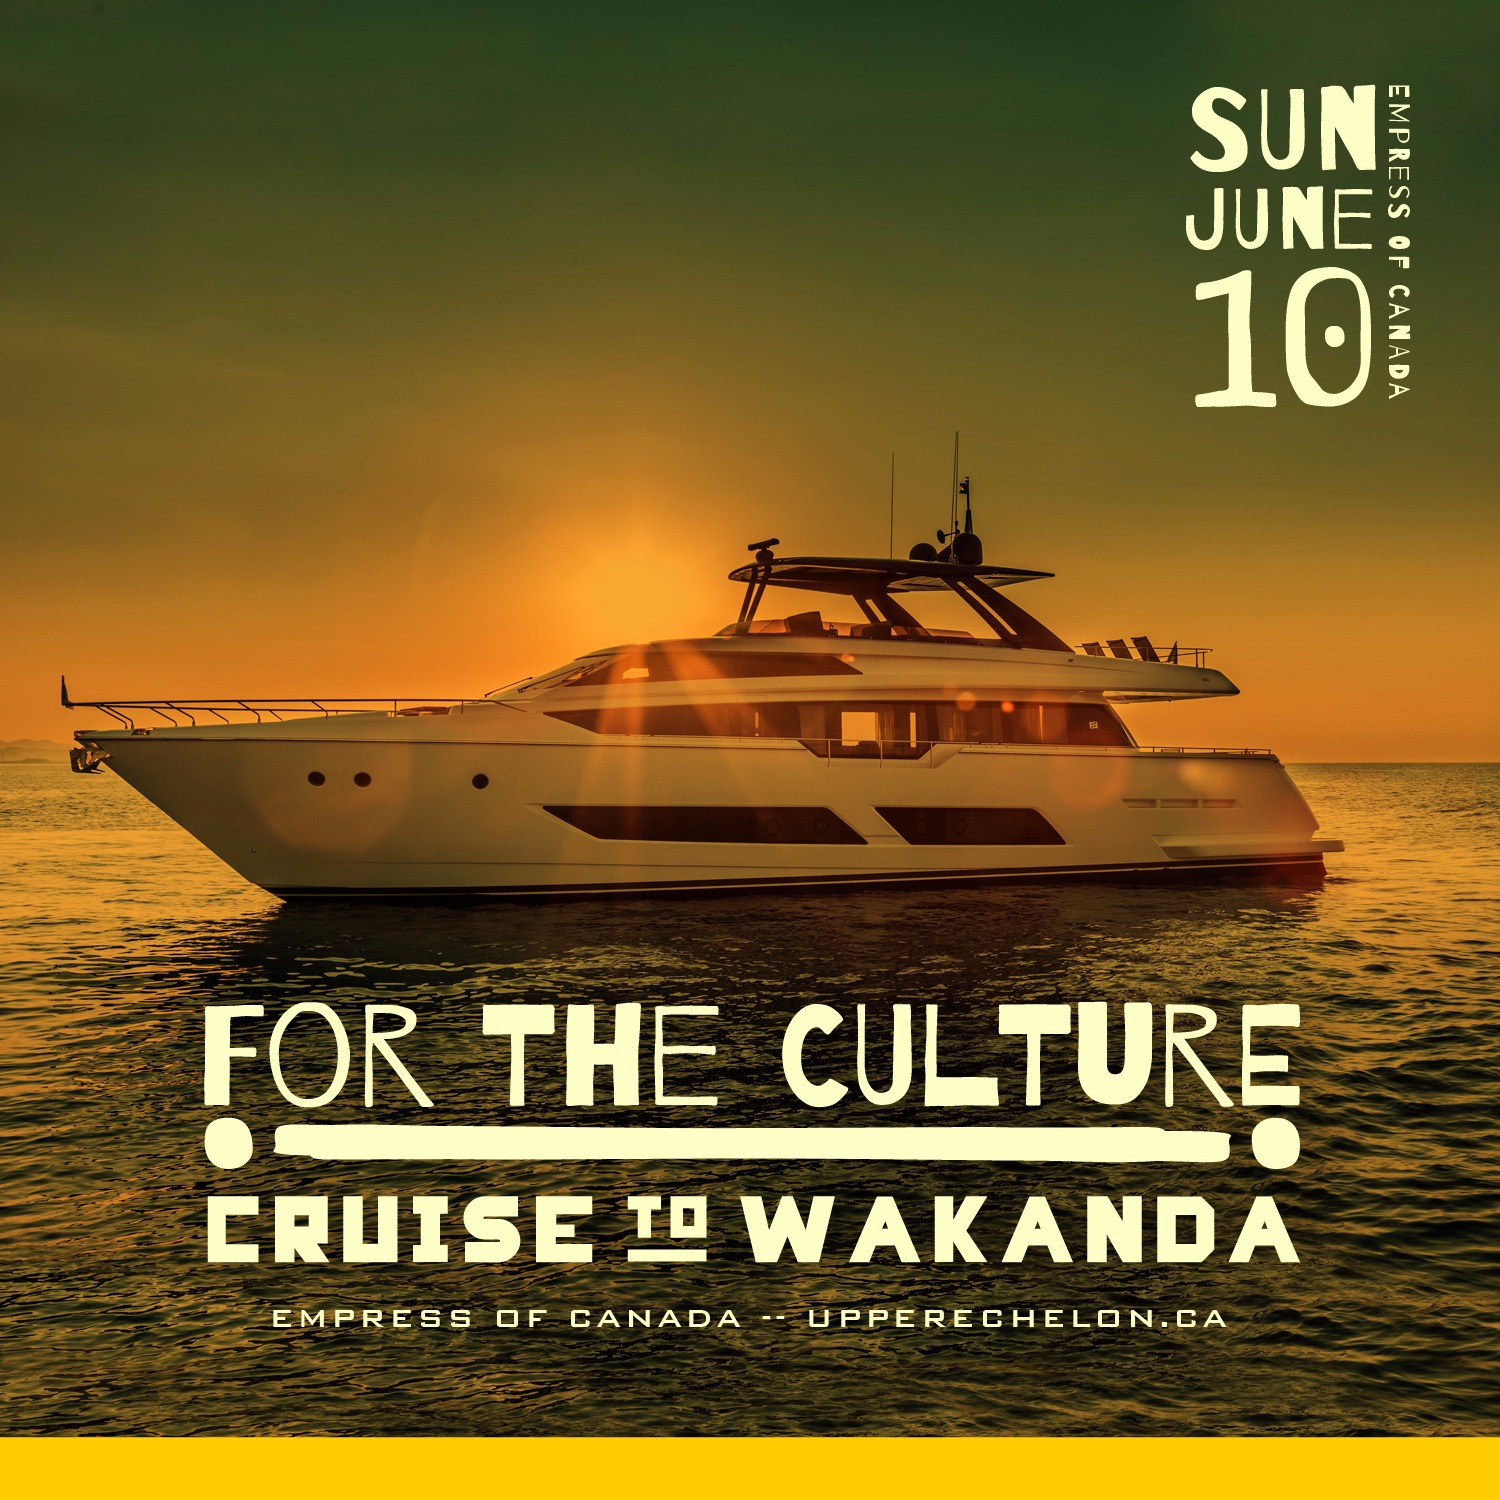 For The Culture | Cruise to Wakanda